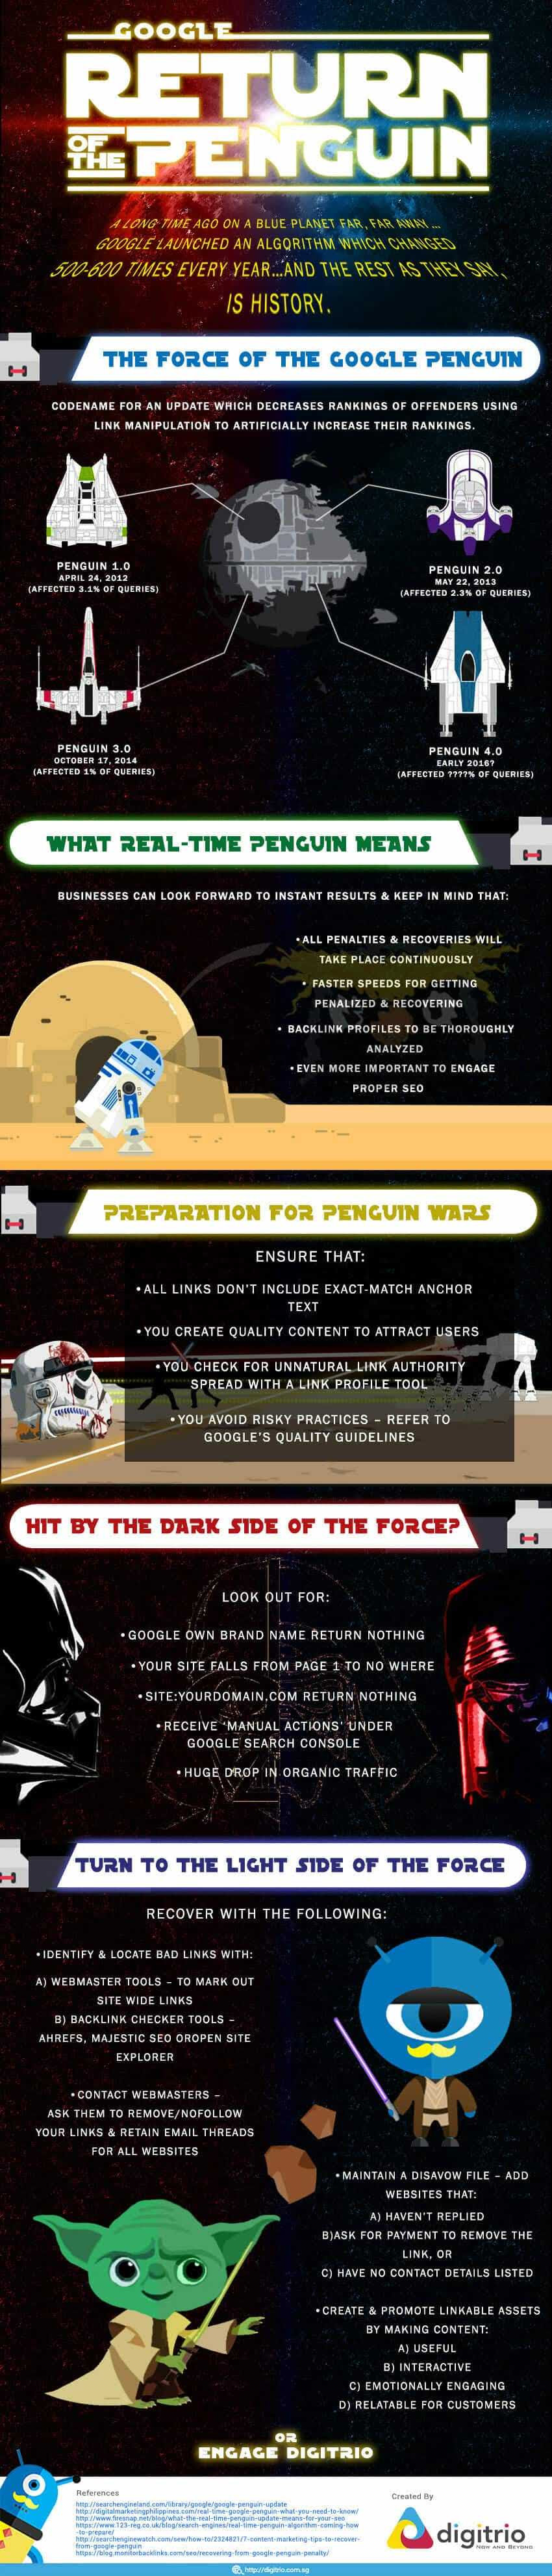 Ultimate Guide to Google Penguin 4.0 #infographic